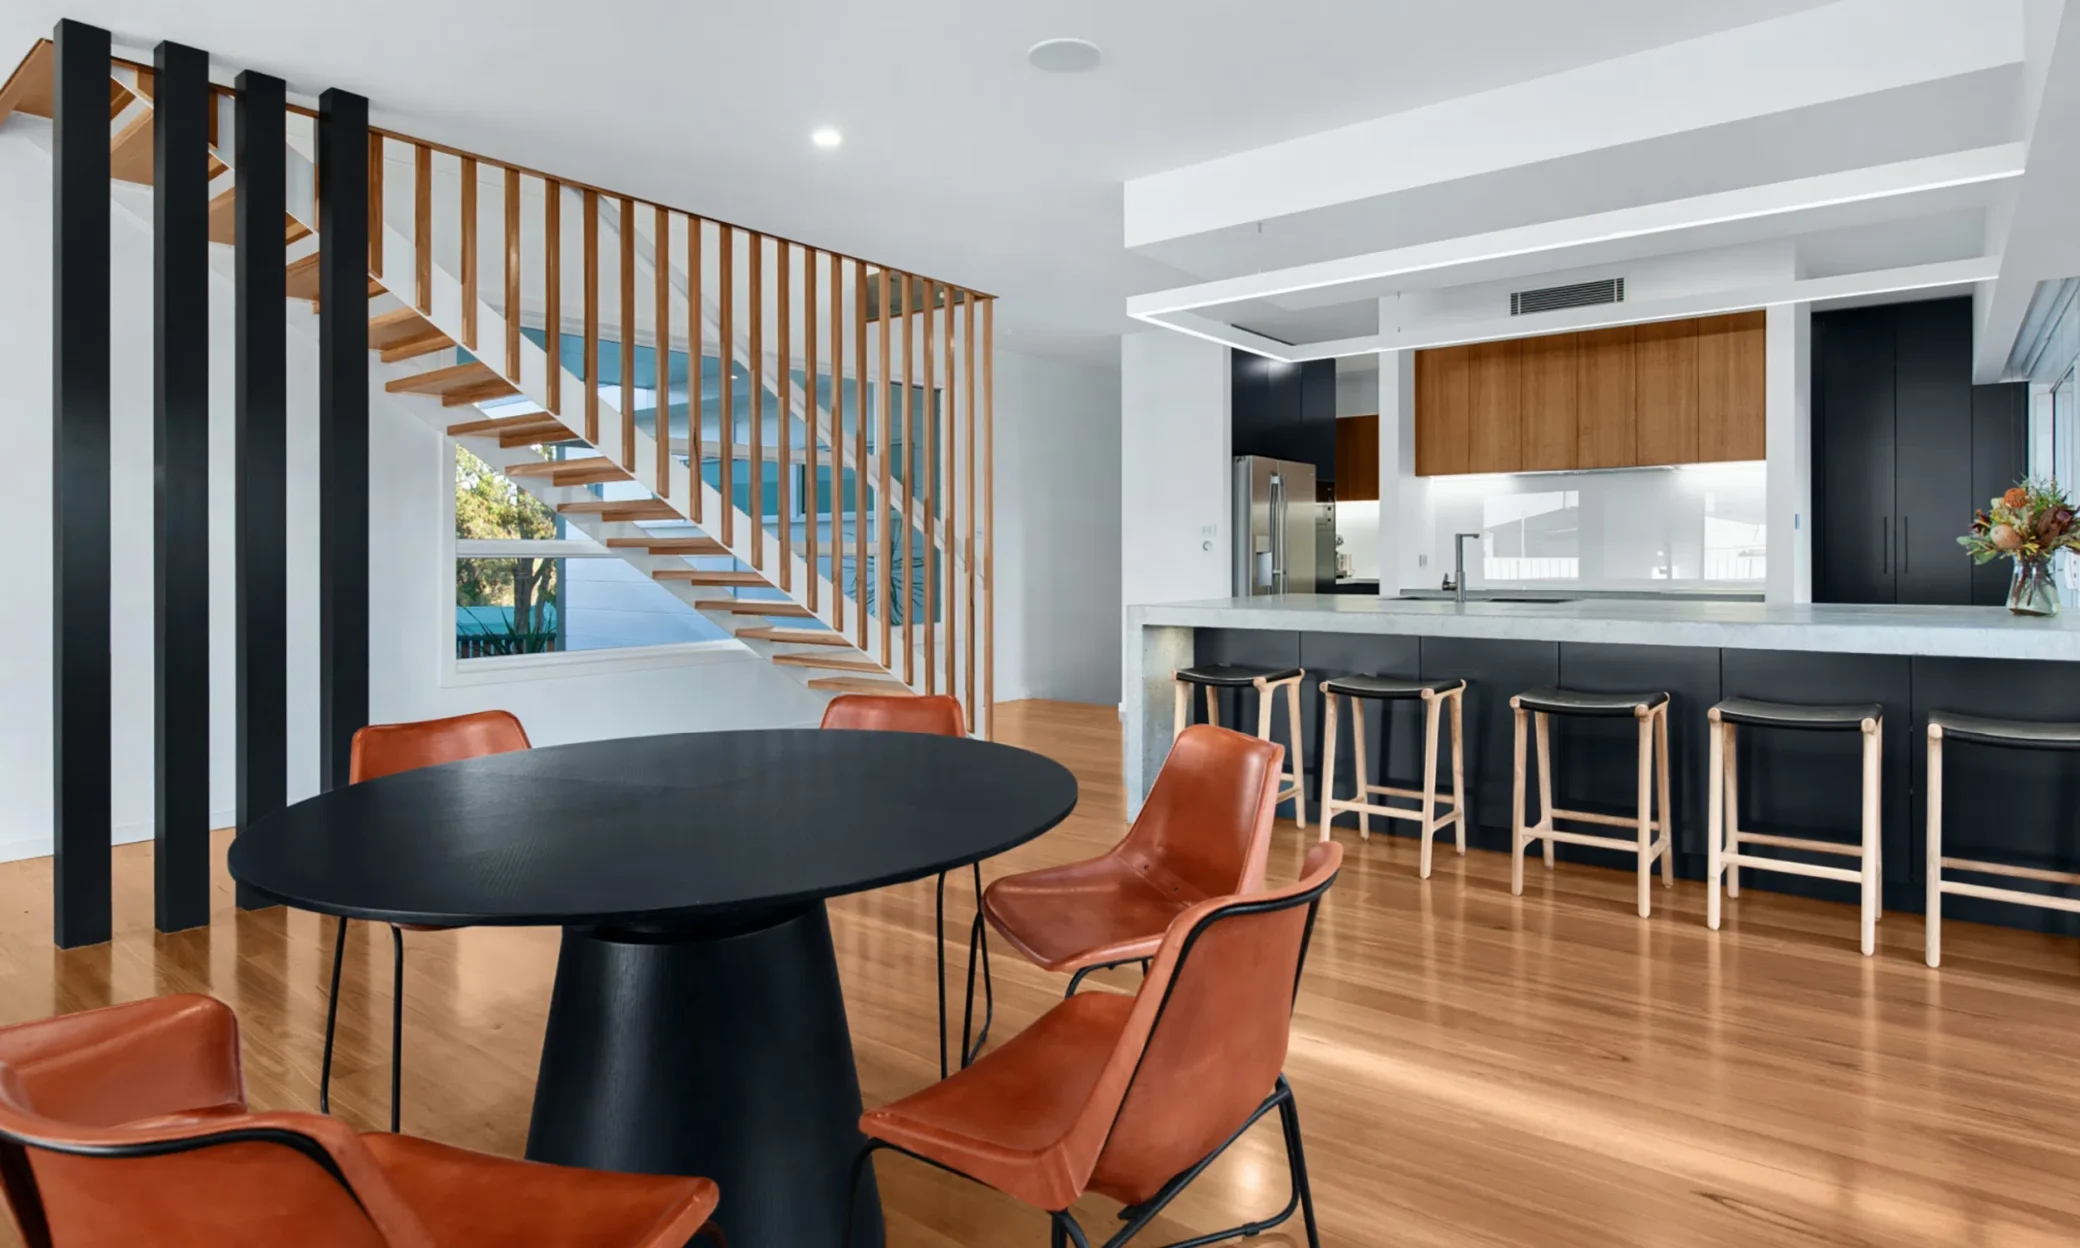 Modern kitchen and dining area featuring a black round table, brown leather chairs, a kitchen island with stools, and a wooden staircase with vertical slats in Newcastle. Bright, airy atmosphere enhanced by large windows